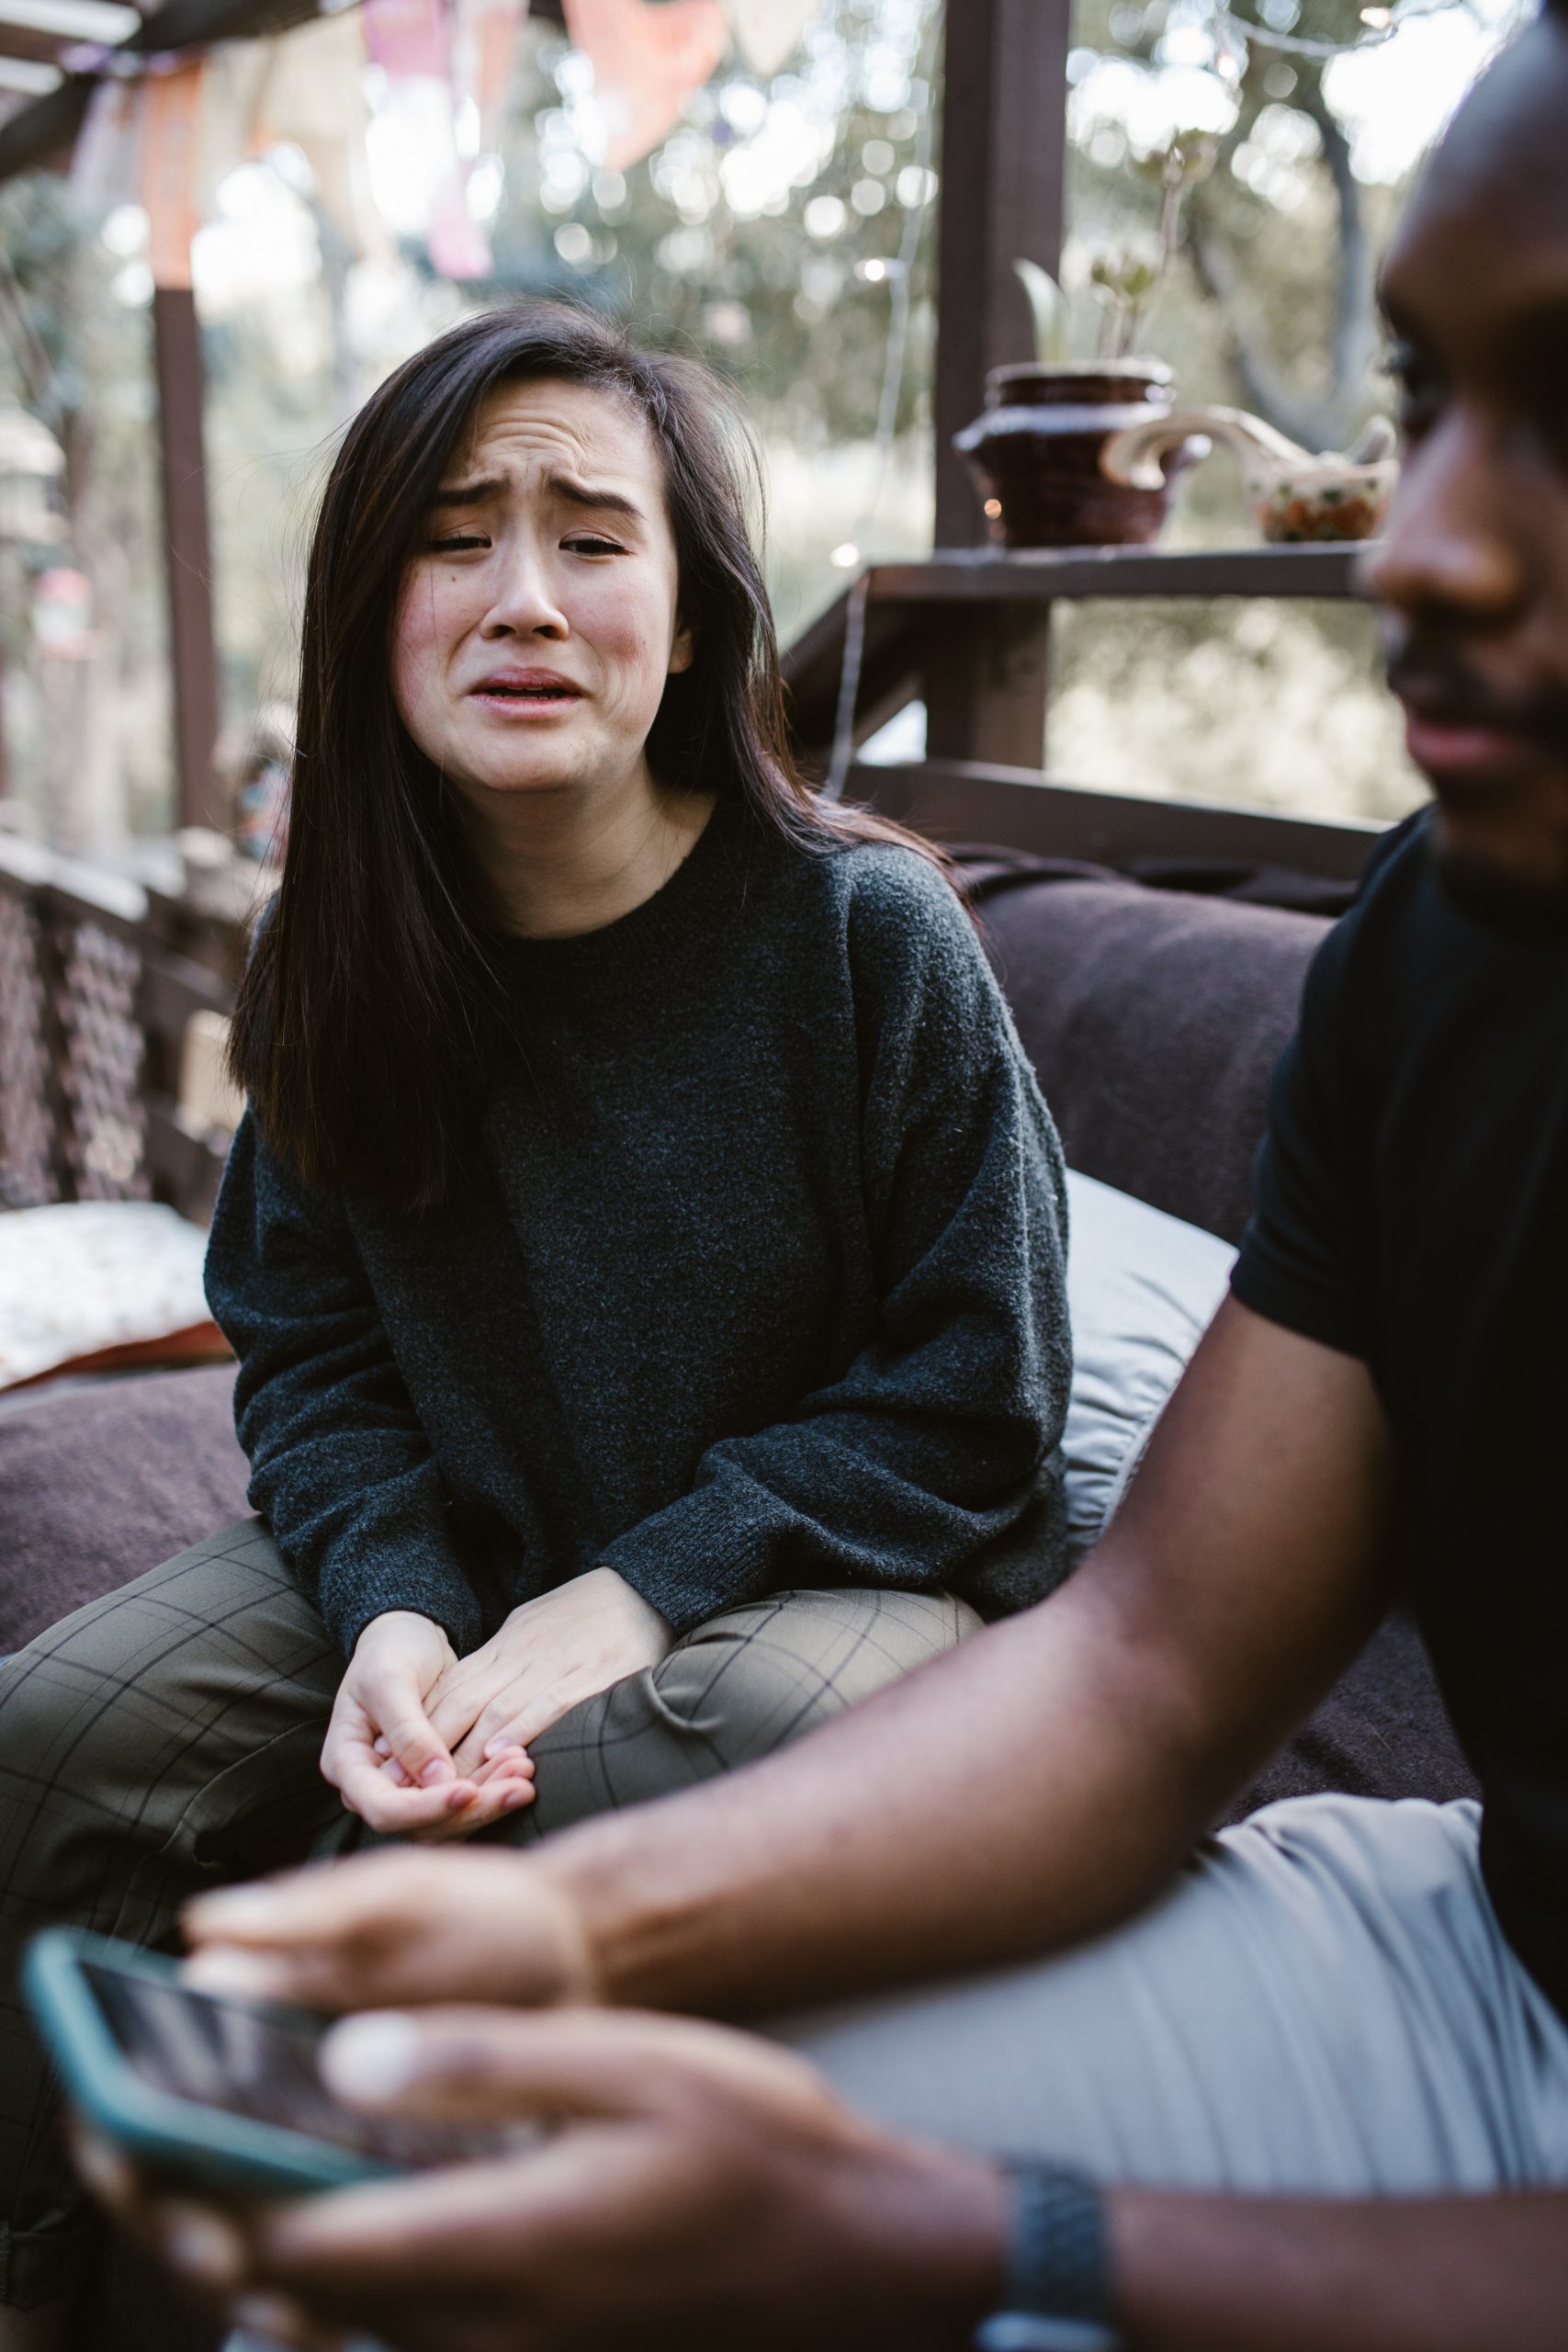 Is emotional abuse considered domestic violence